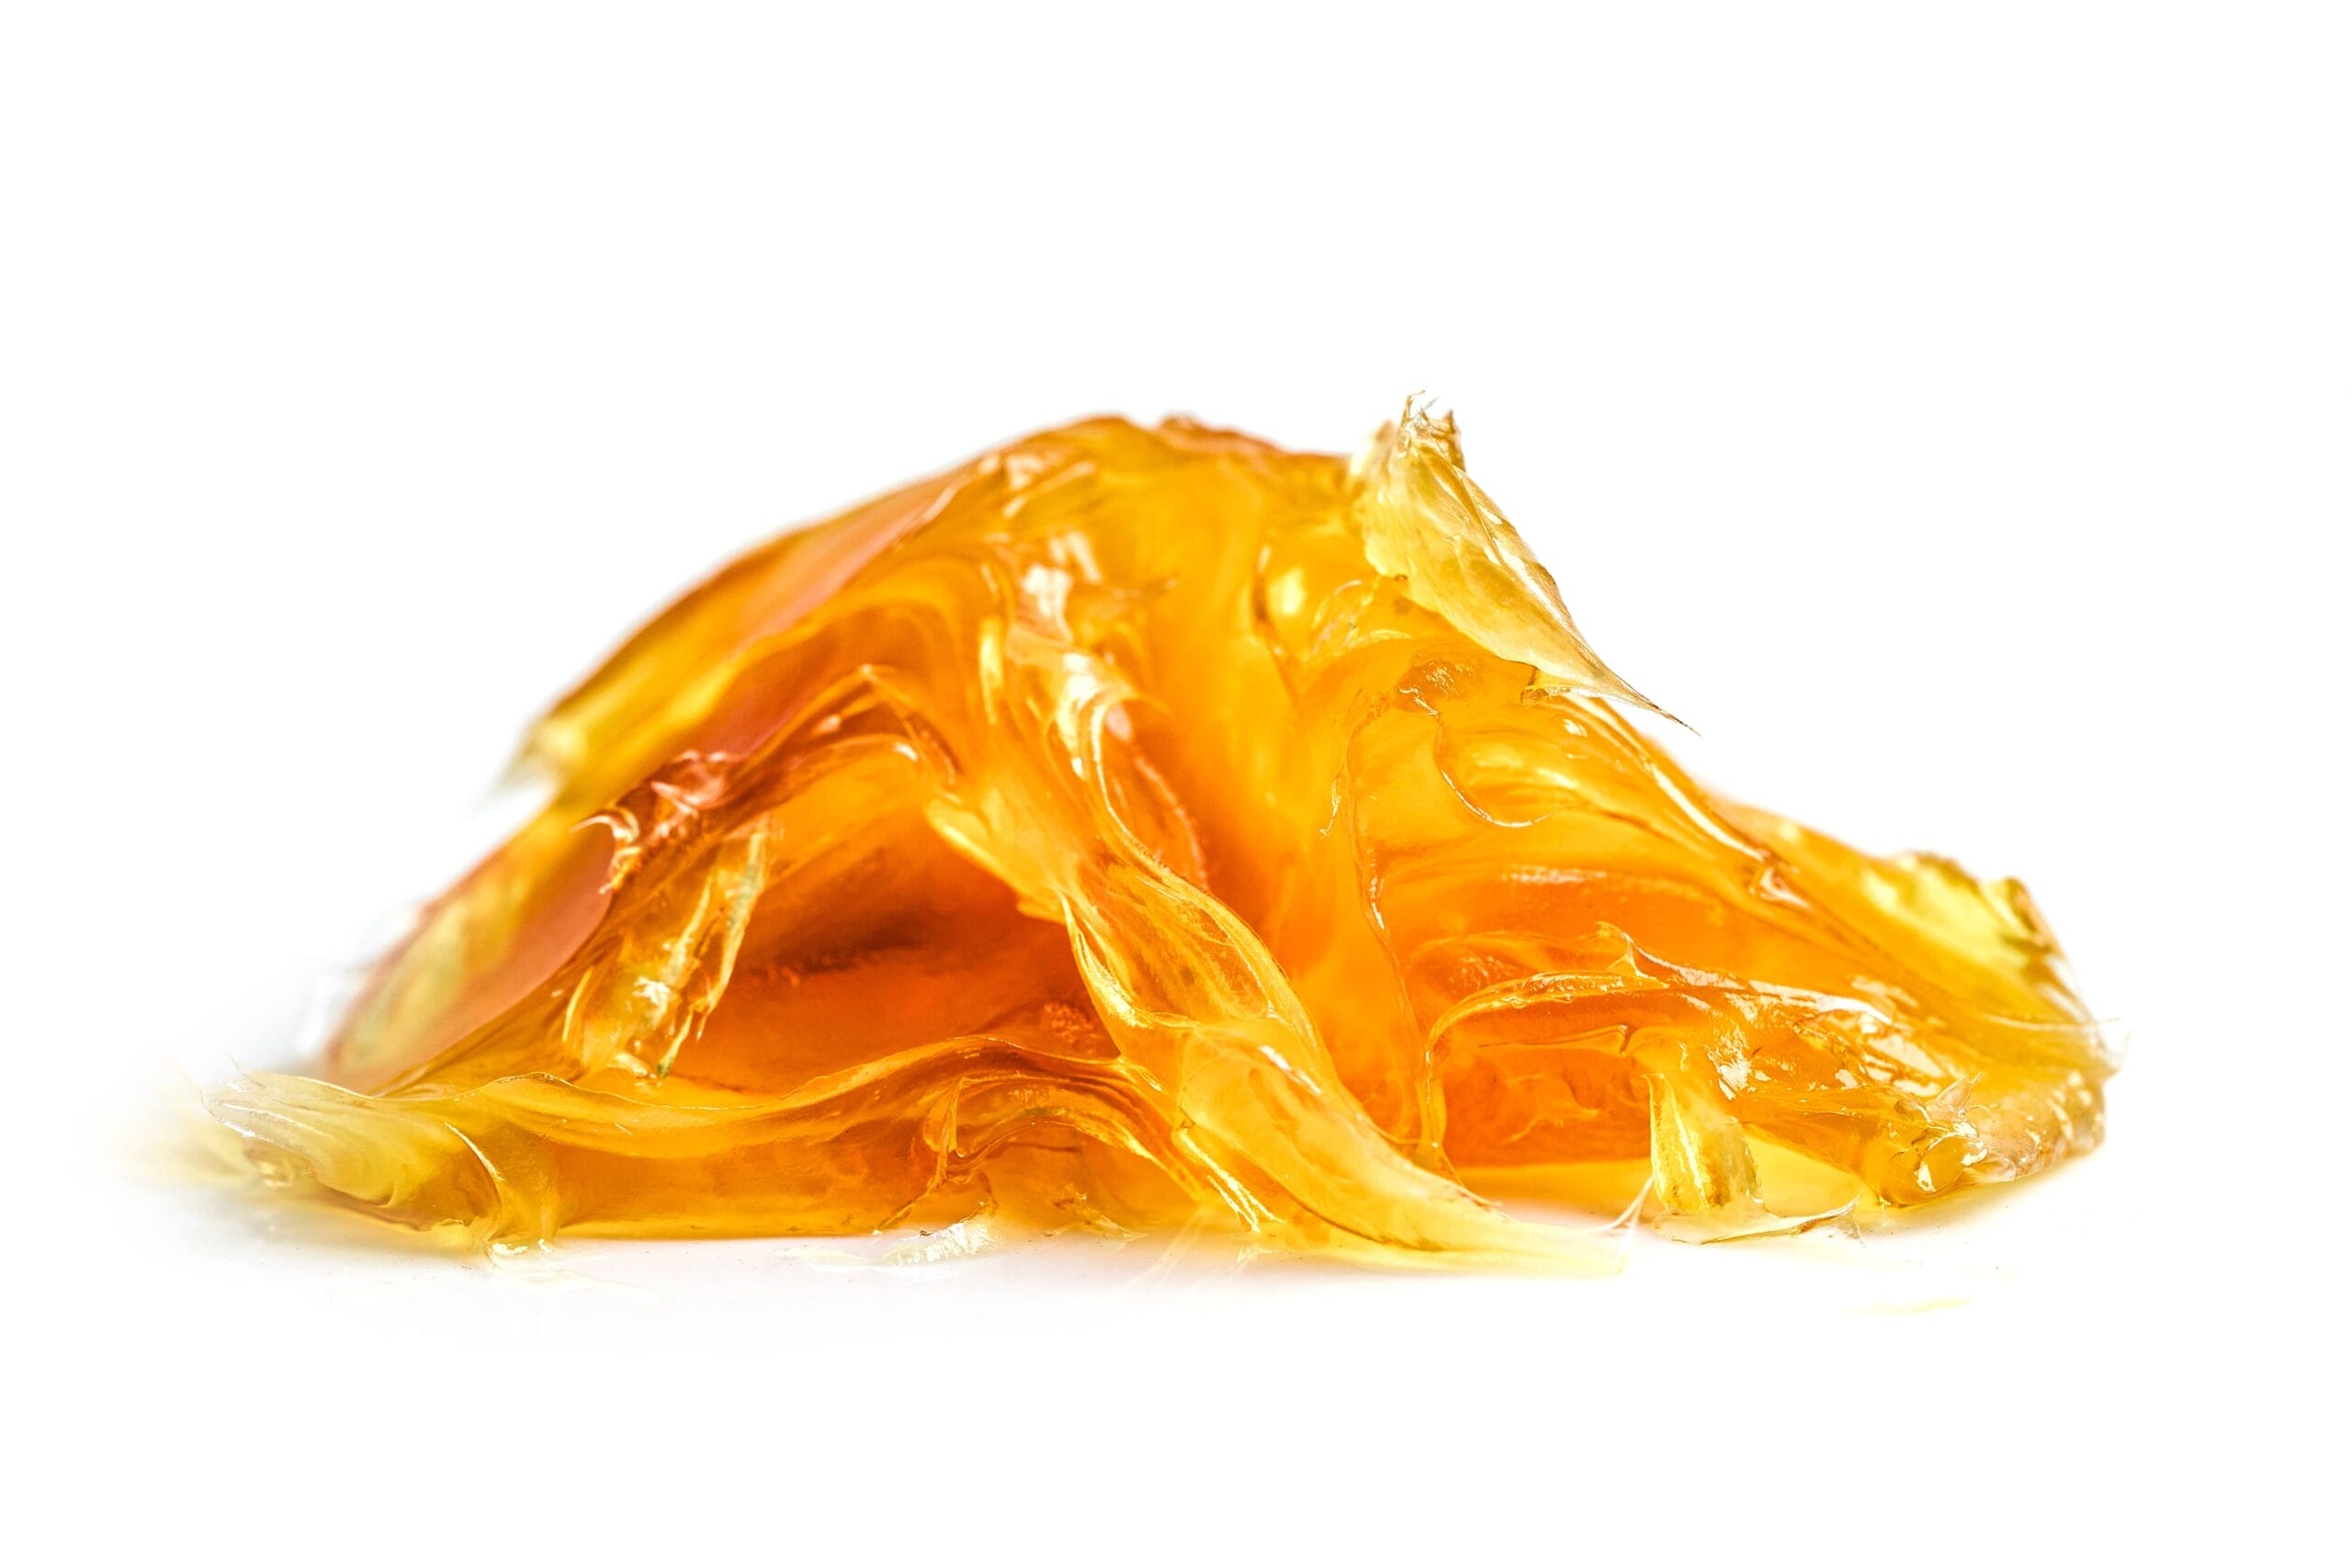 Buy cheap shatter online Canada